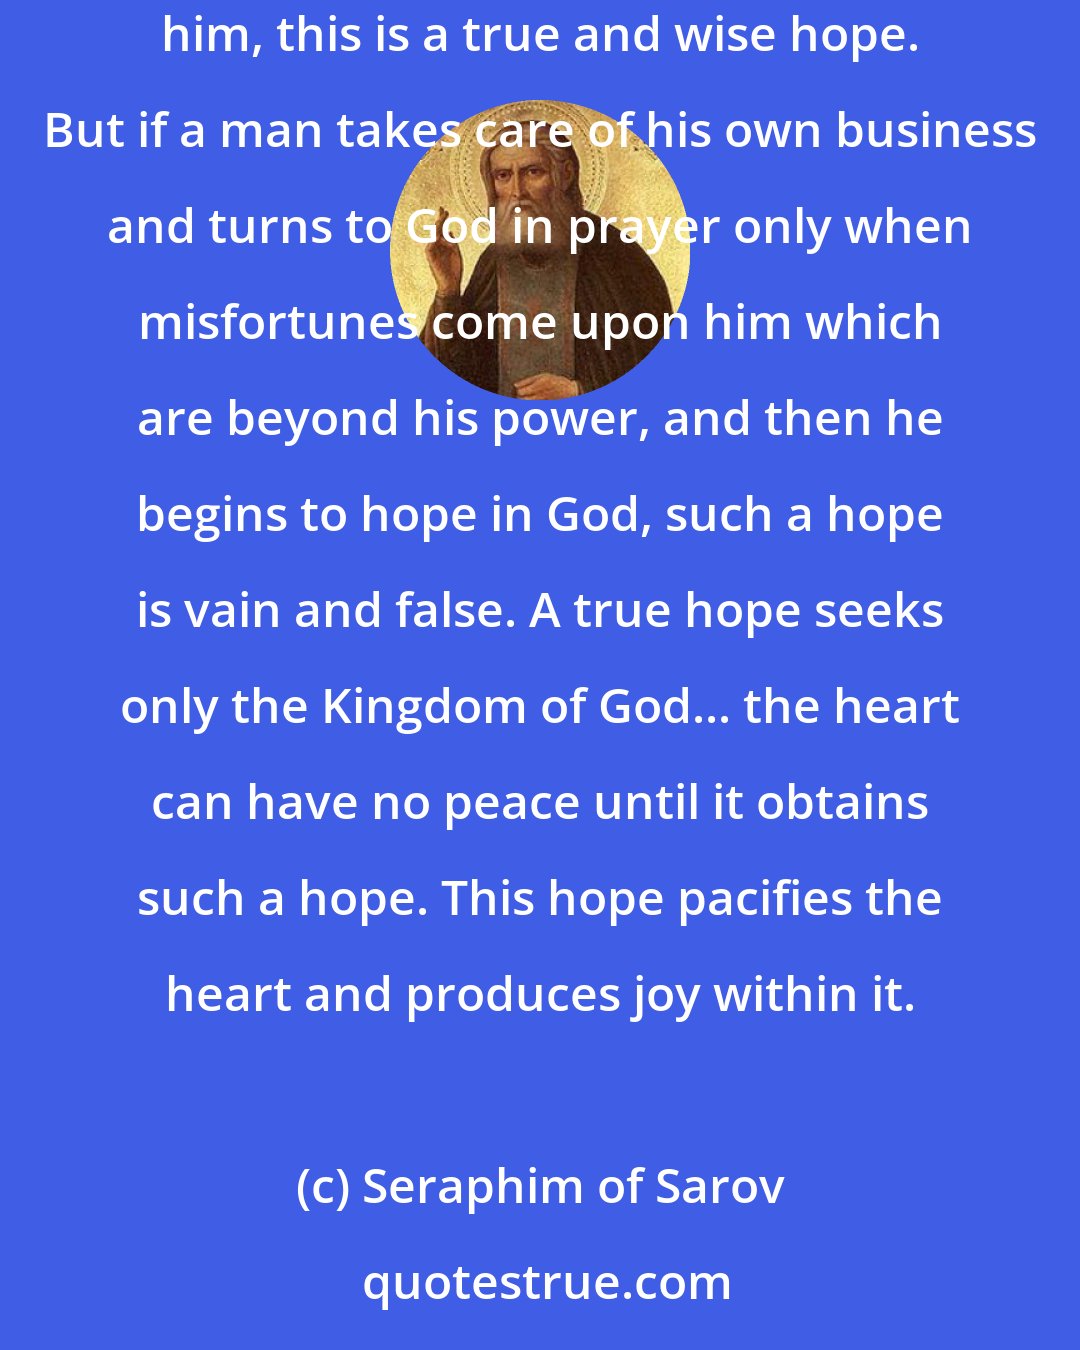 Seraphim of Sarov: If a man has no worries about himself at all for the sake of love toward God and the working of good deeds, knowing that God is taking care of him, this is a true and wise hope. But if a man takes care of his own business and turns to God in prayer only when misfortunes come upon him which are beyond his power, and then he begins to hope in God, such a hope is vain and false. A true hope seeks only the Kingdom of God... the heart can have no peace until it obtains such a hope. This hope pacifies the heart and produces joy within it.